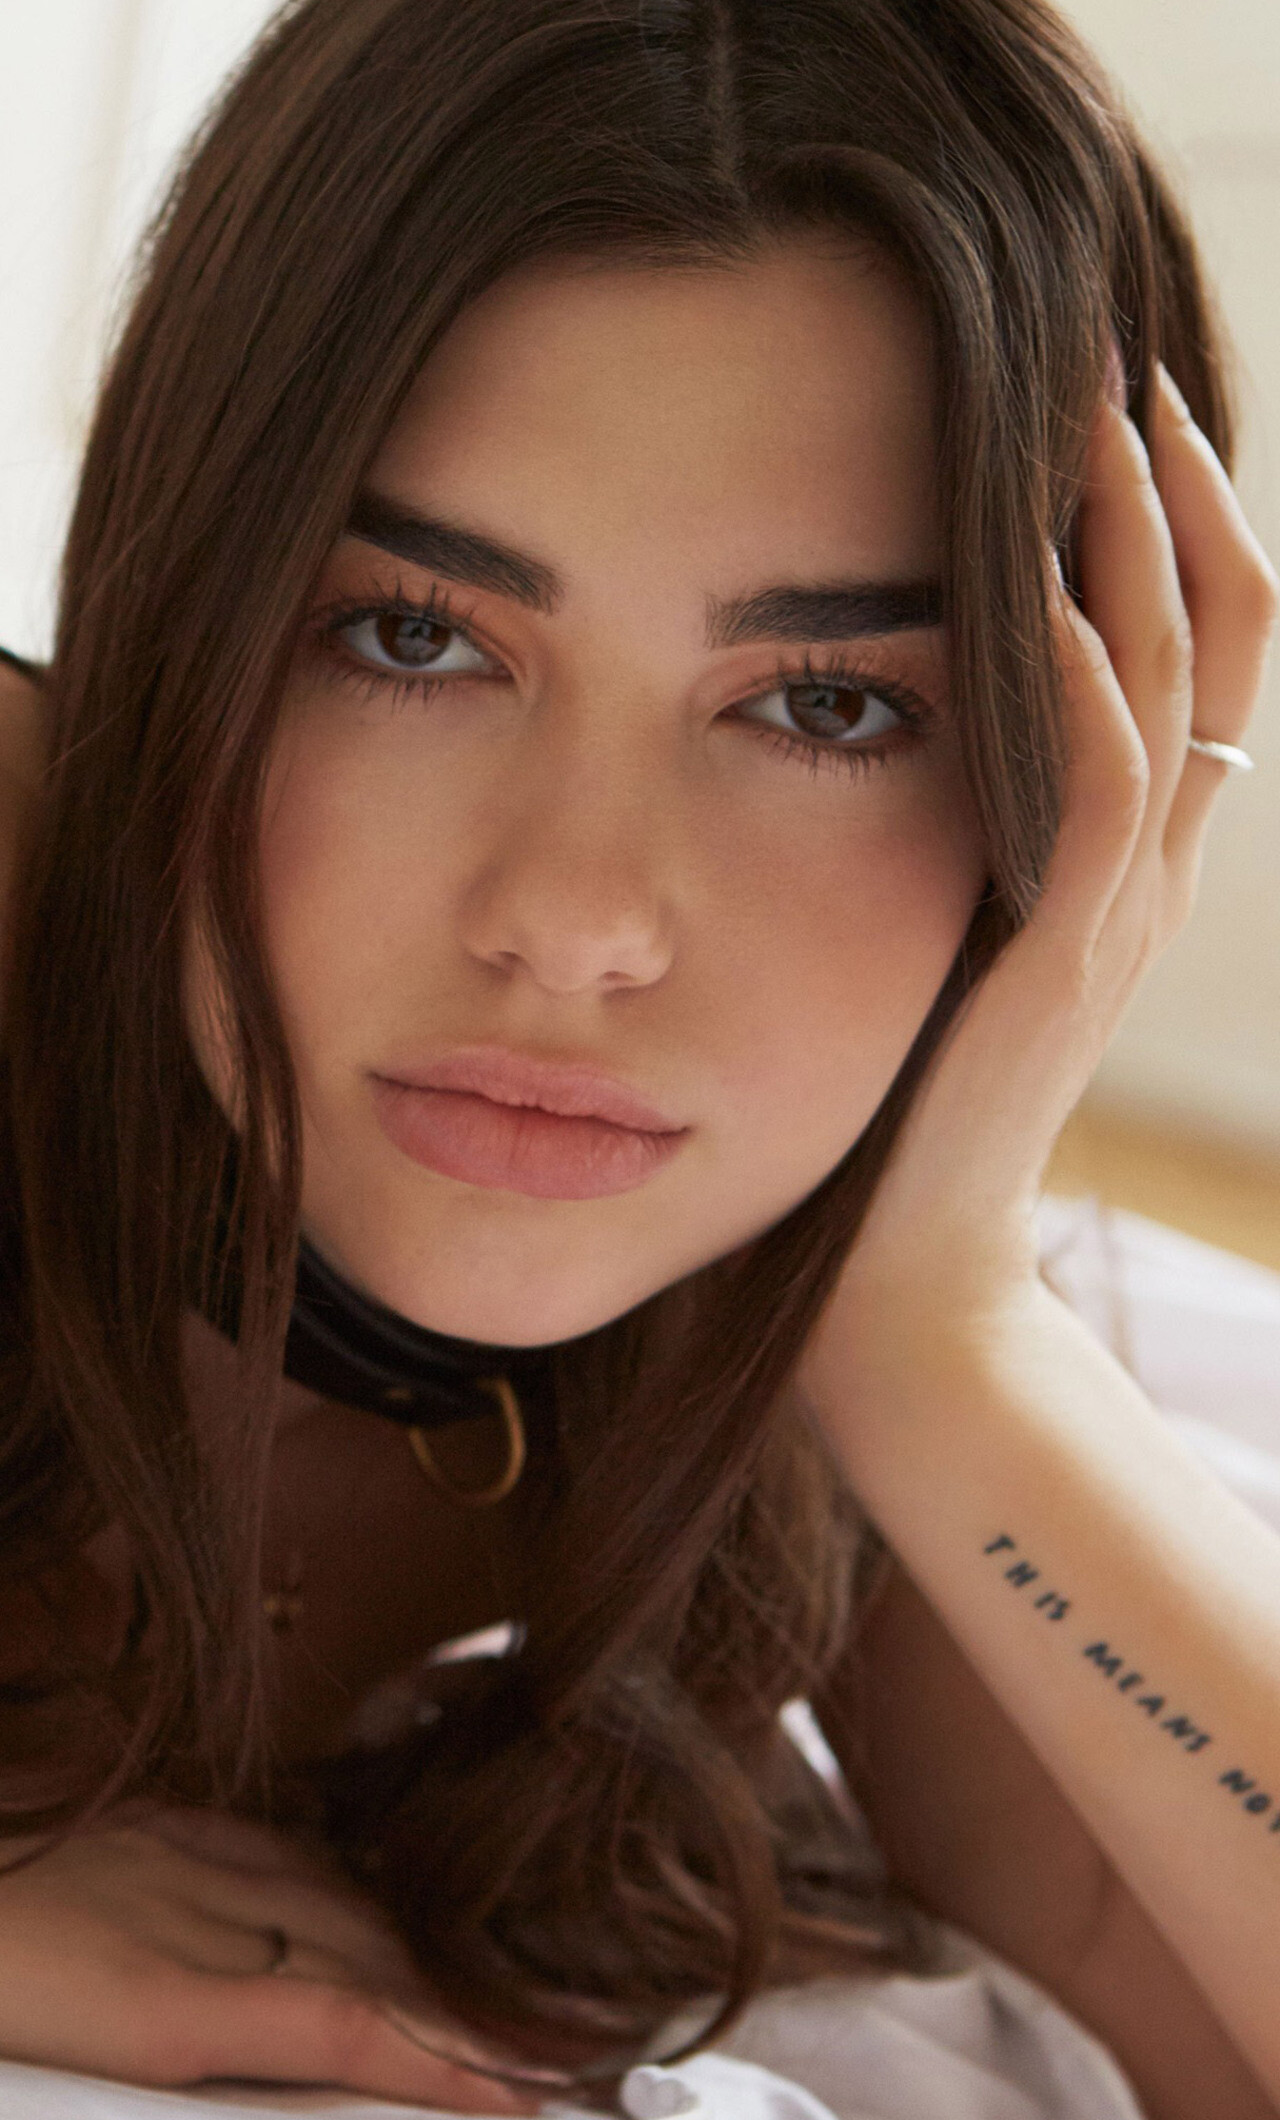 Dua Lipa: Released the single "Scared to Be Lonely", a collaboration with Martin Garrix. 1280x2120 HD Background.